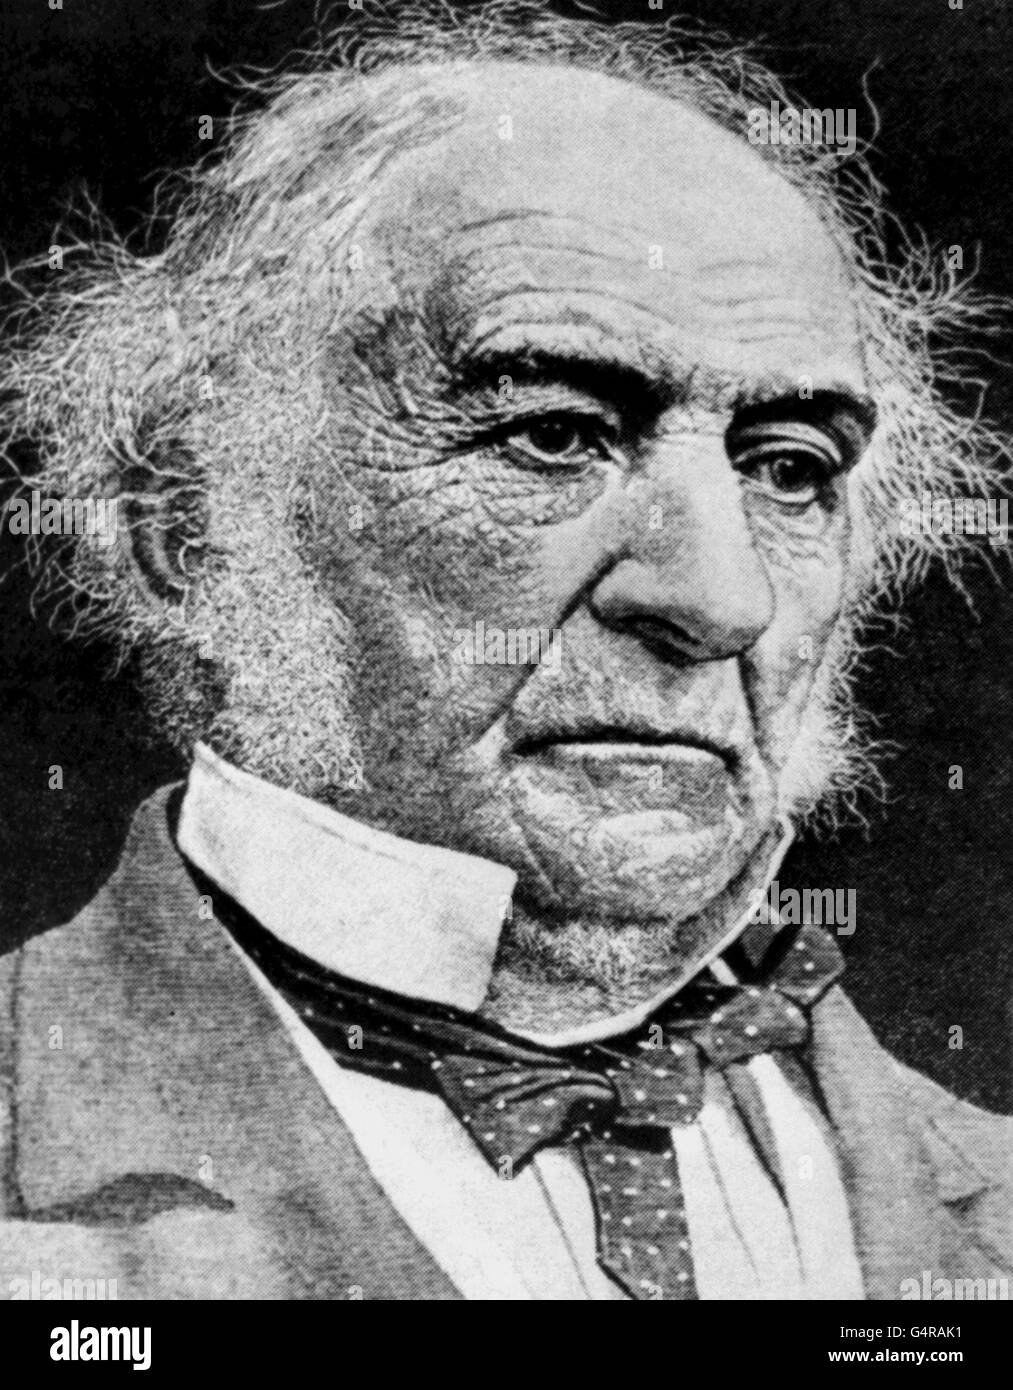 WILLIAM GLADSTONE, circa 1880.(1809-1898), Victorian Liberal leader, who gave a 4 hour and 45 minute budget speech in 1853. He was British Prime minister four times and, latterly, devoted much time to a Home Rule Bill for Ireland which was ultimately unsuccessful. Stock Photo